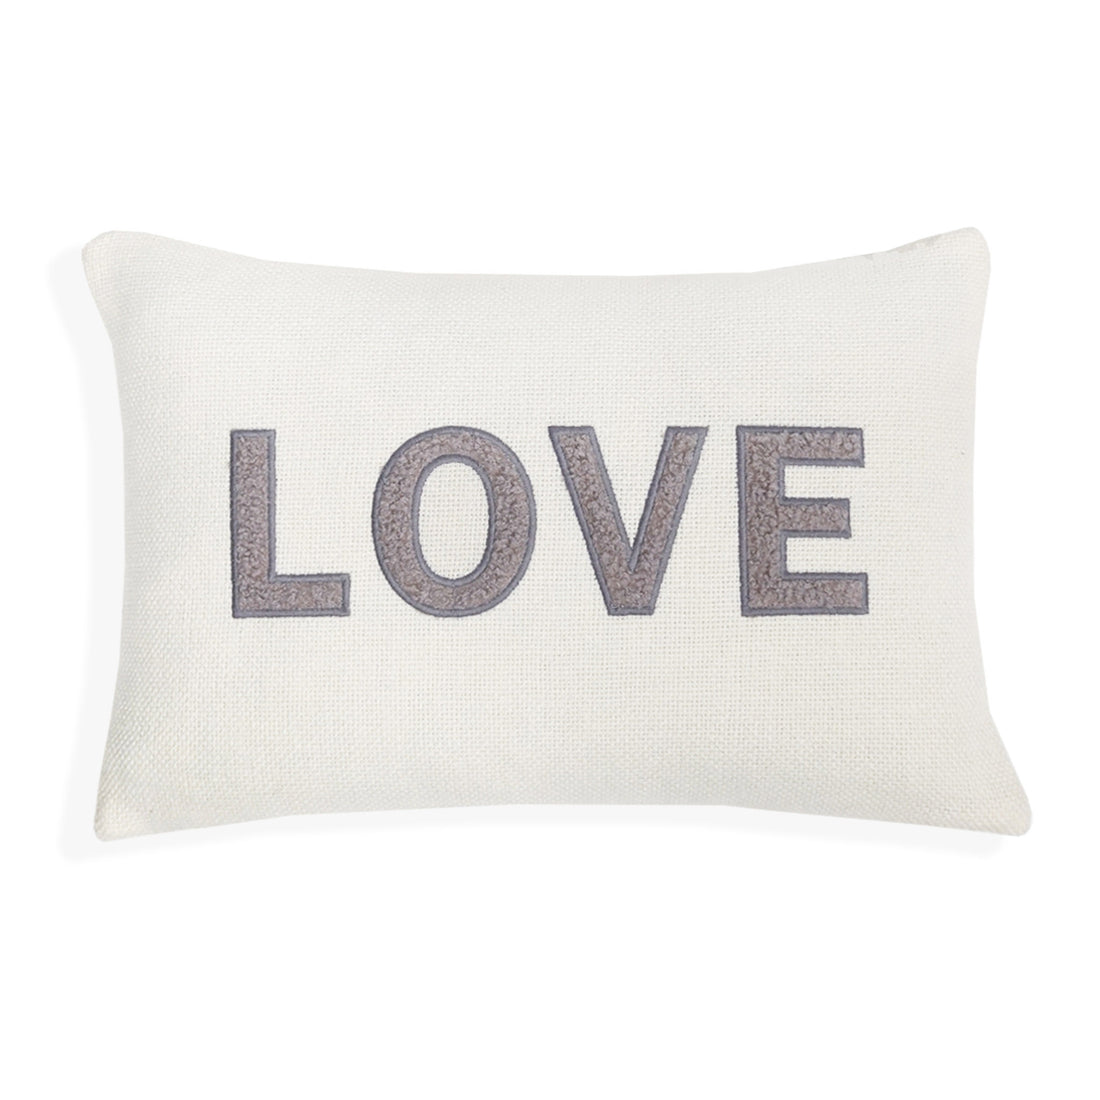 Love Teddy Throw Pillow Cover | Ivory/Gray | 14" x 20"